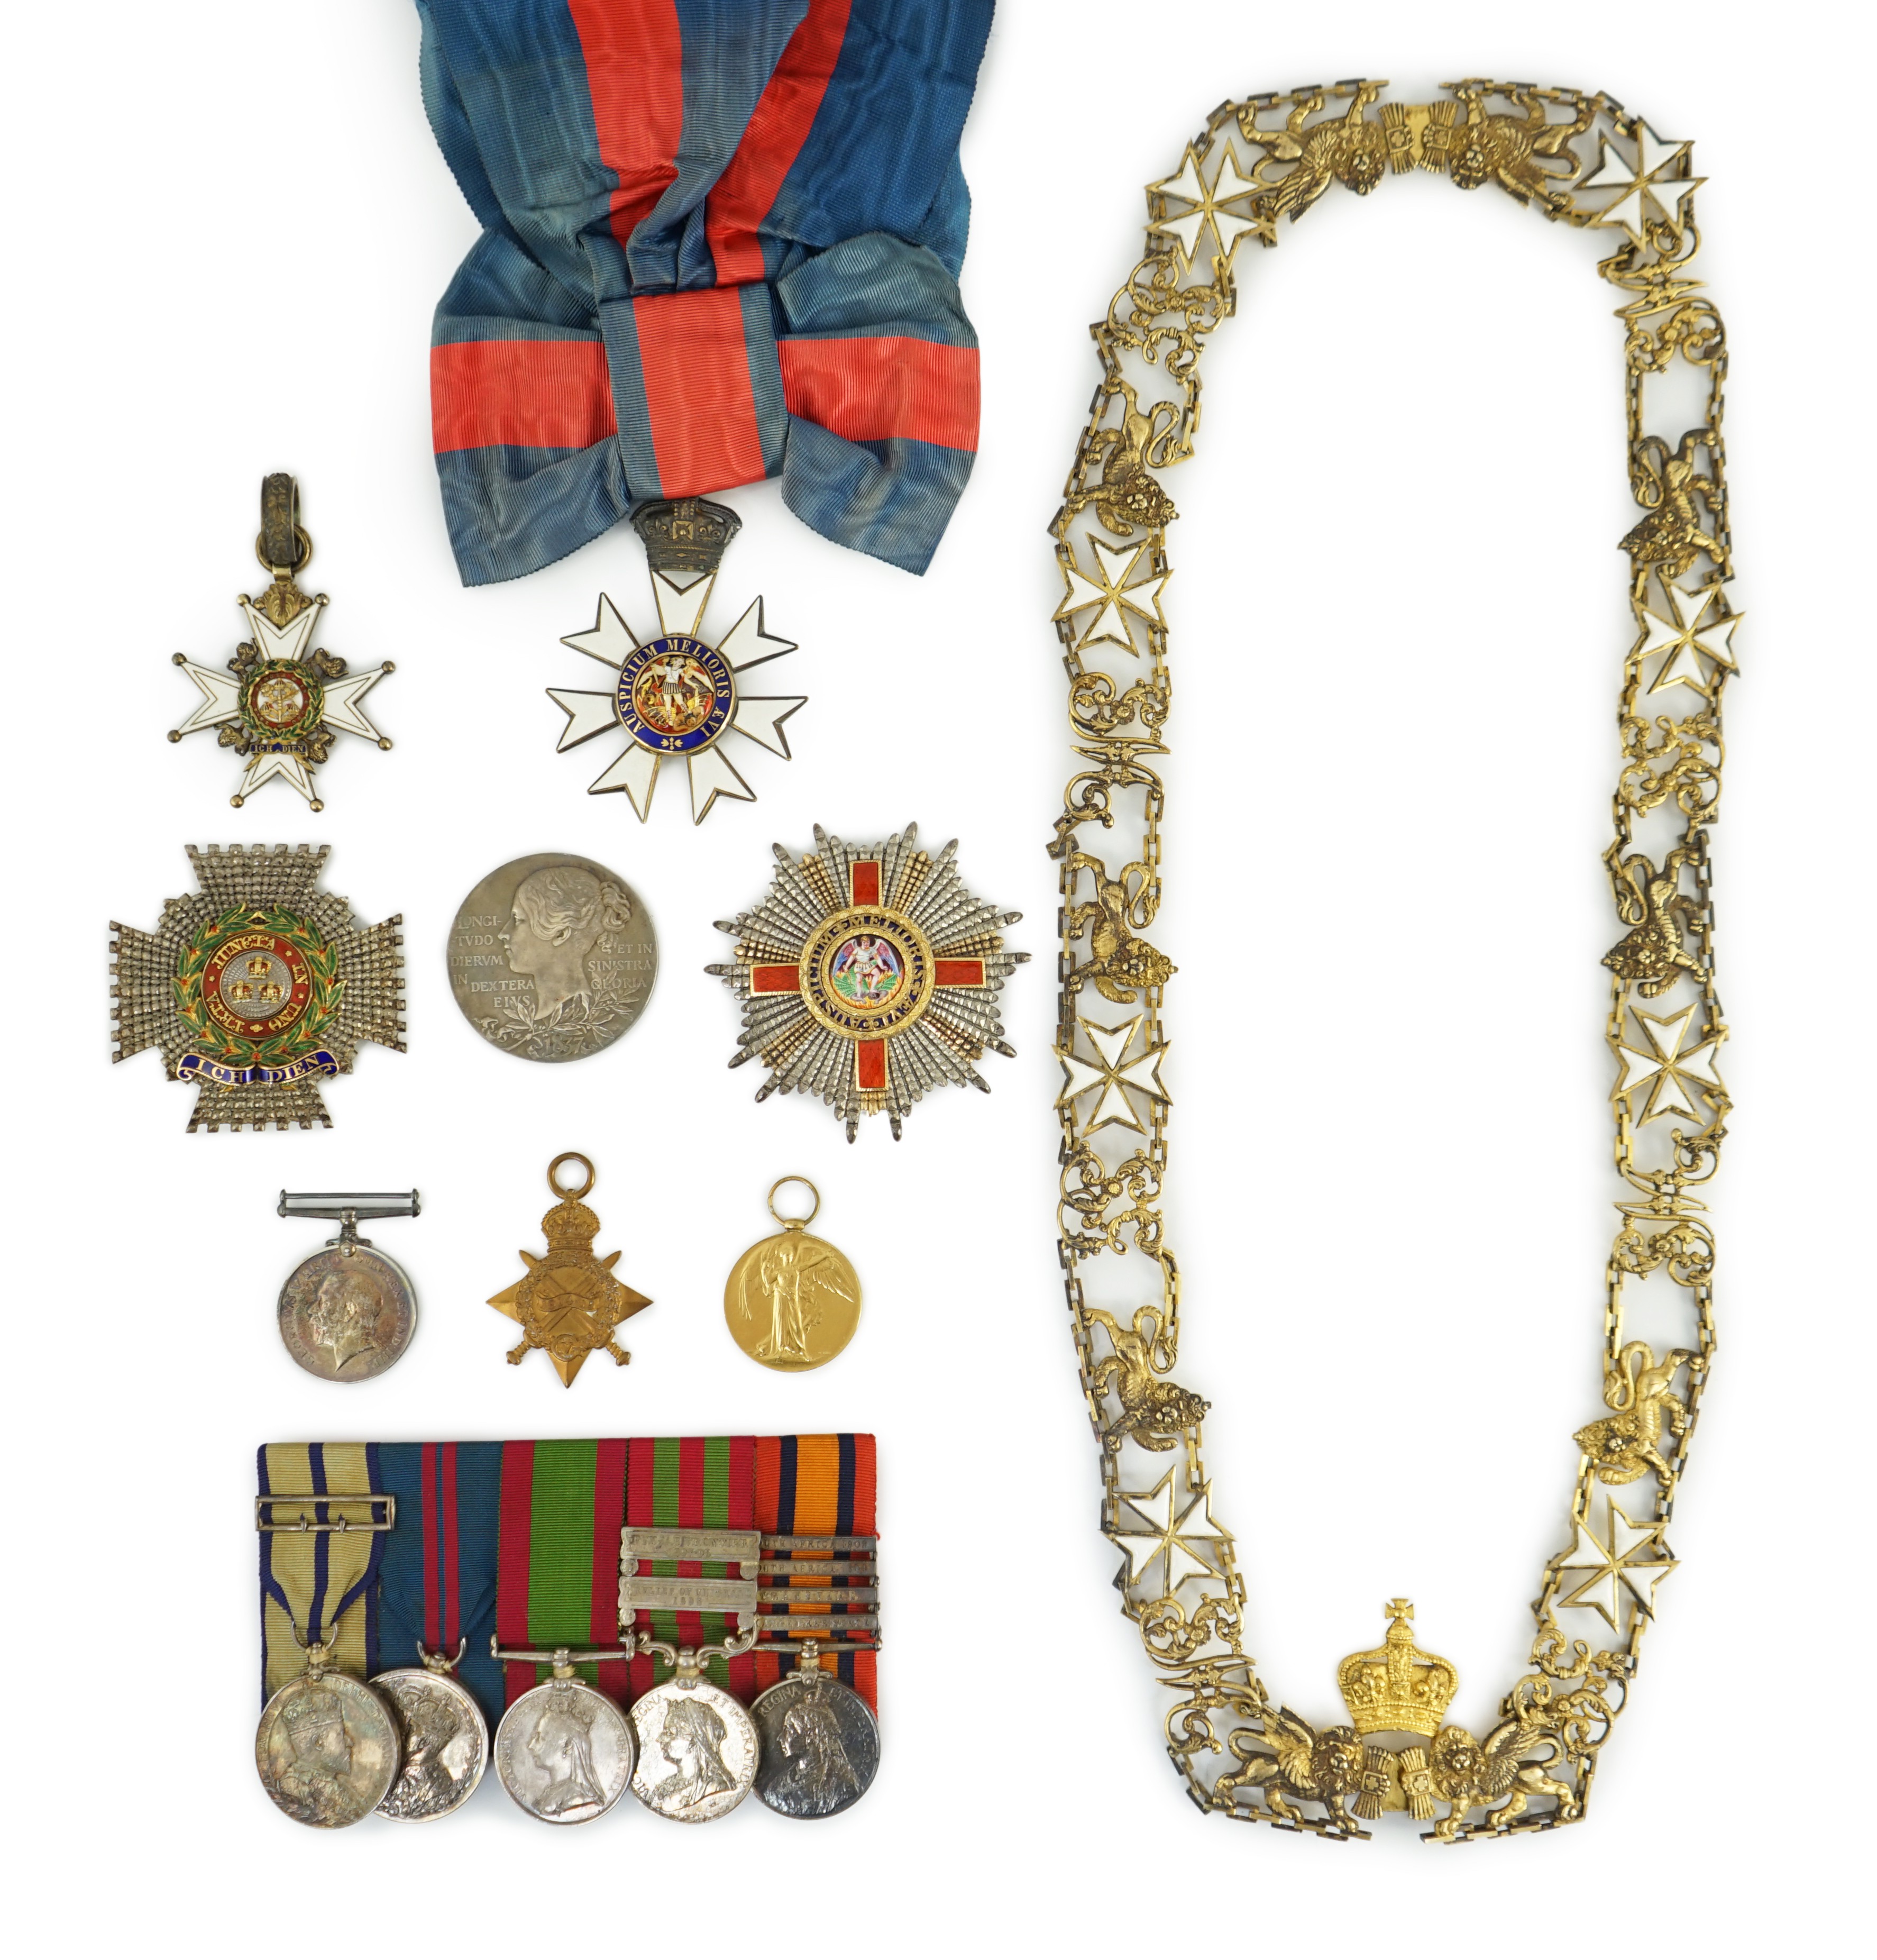 A magnificent group of Afghanistan, Indian General Service, Boer War, and Great War of eleven medals, awarded to General Sir John Eccles Nixon, GCMG KCB, who was the General responsible for the disastrous first British E